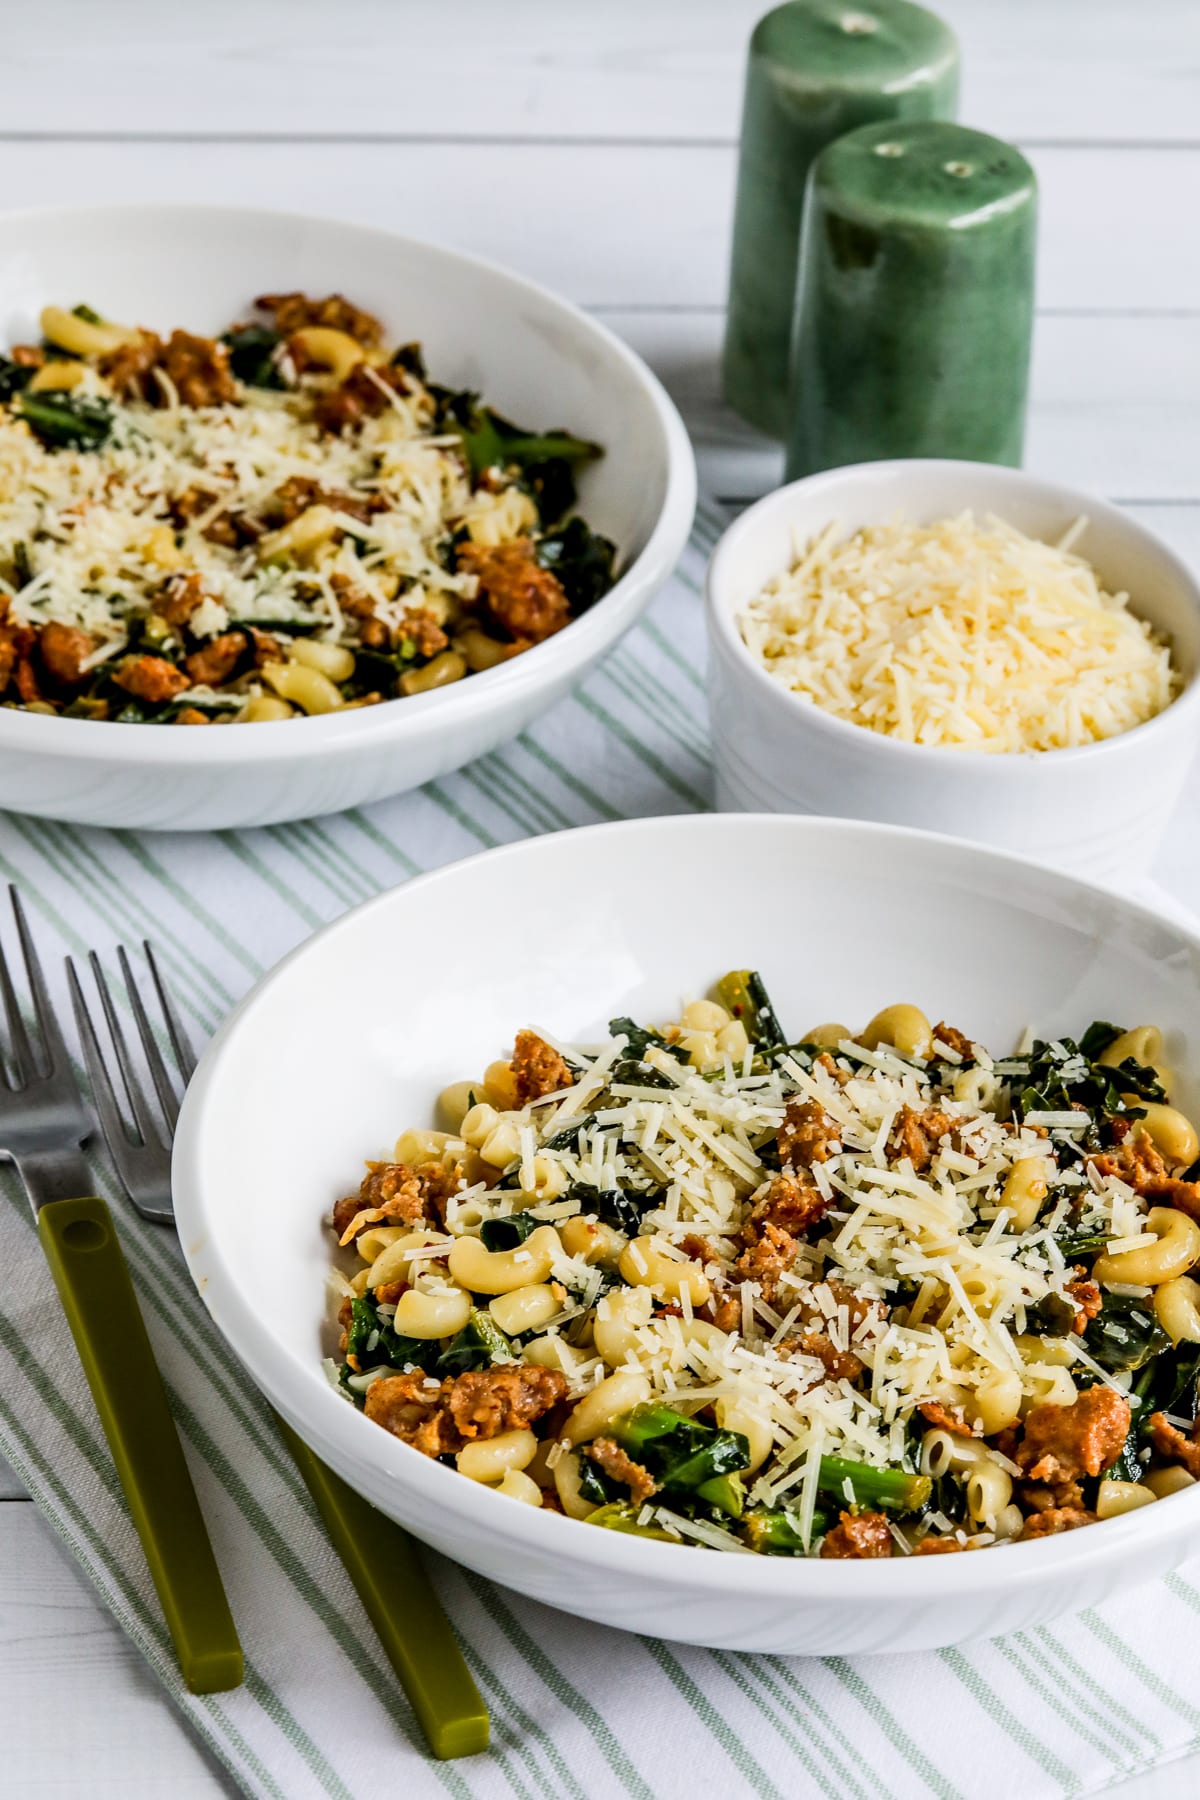 Italian Sausage Pasta with Collard Greens shown in two bowls with Parmesan and green salt and pepper shakers.